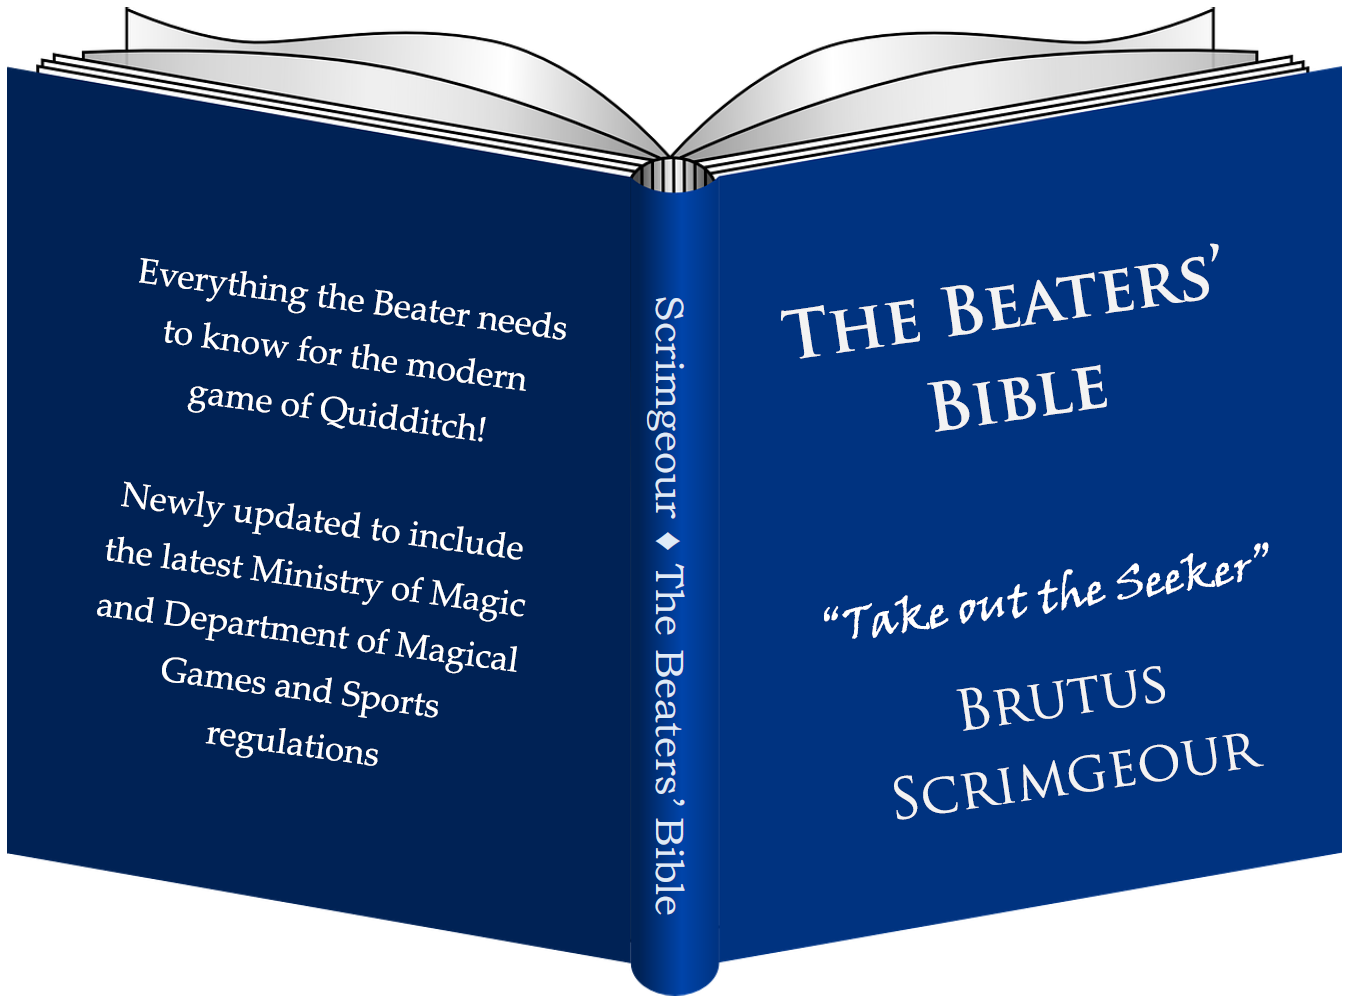 The Beaters’ Bible